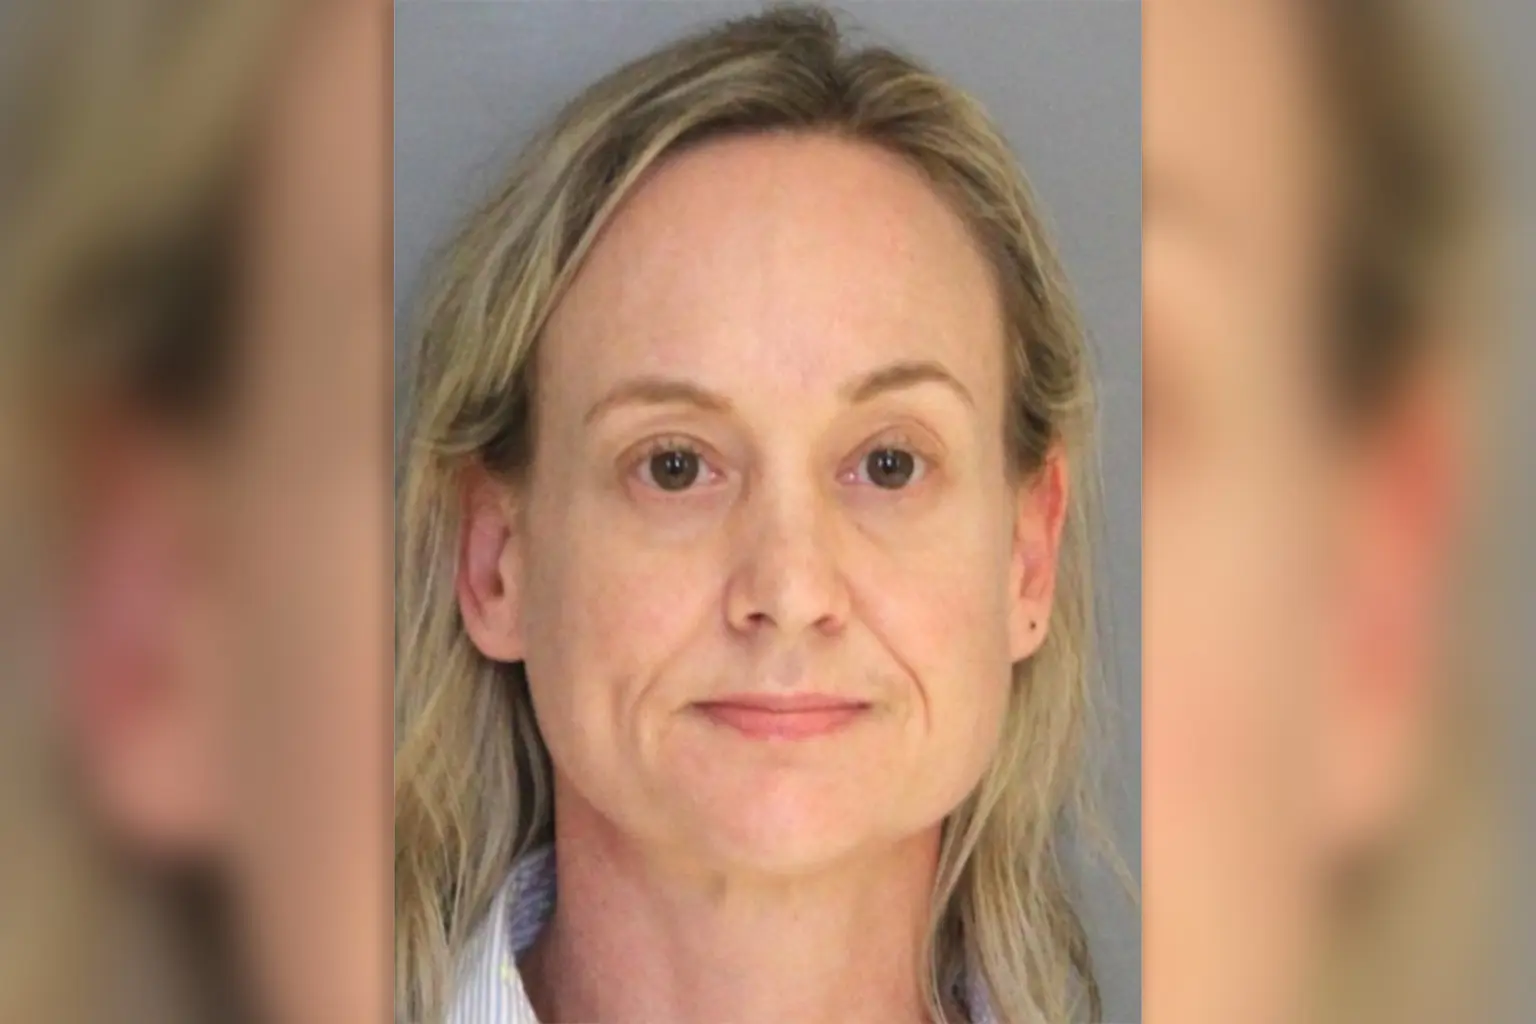 Delaware former teacher at middle school accused of having 2-month ‘sexual relationship’ with student